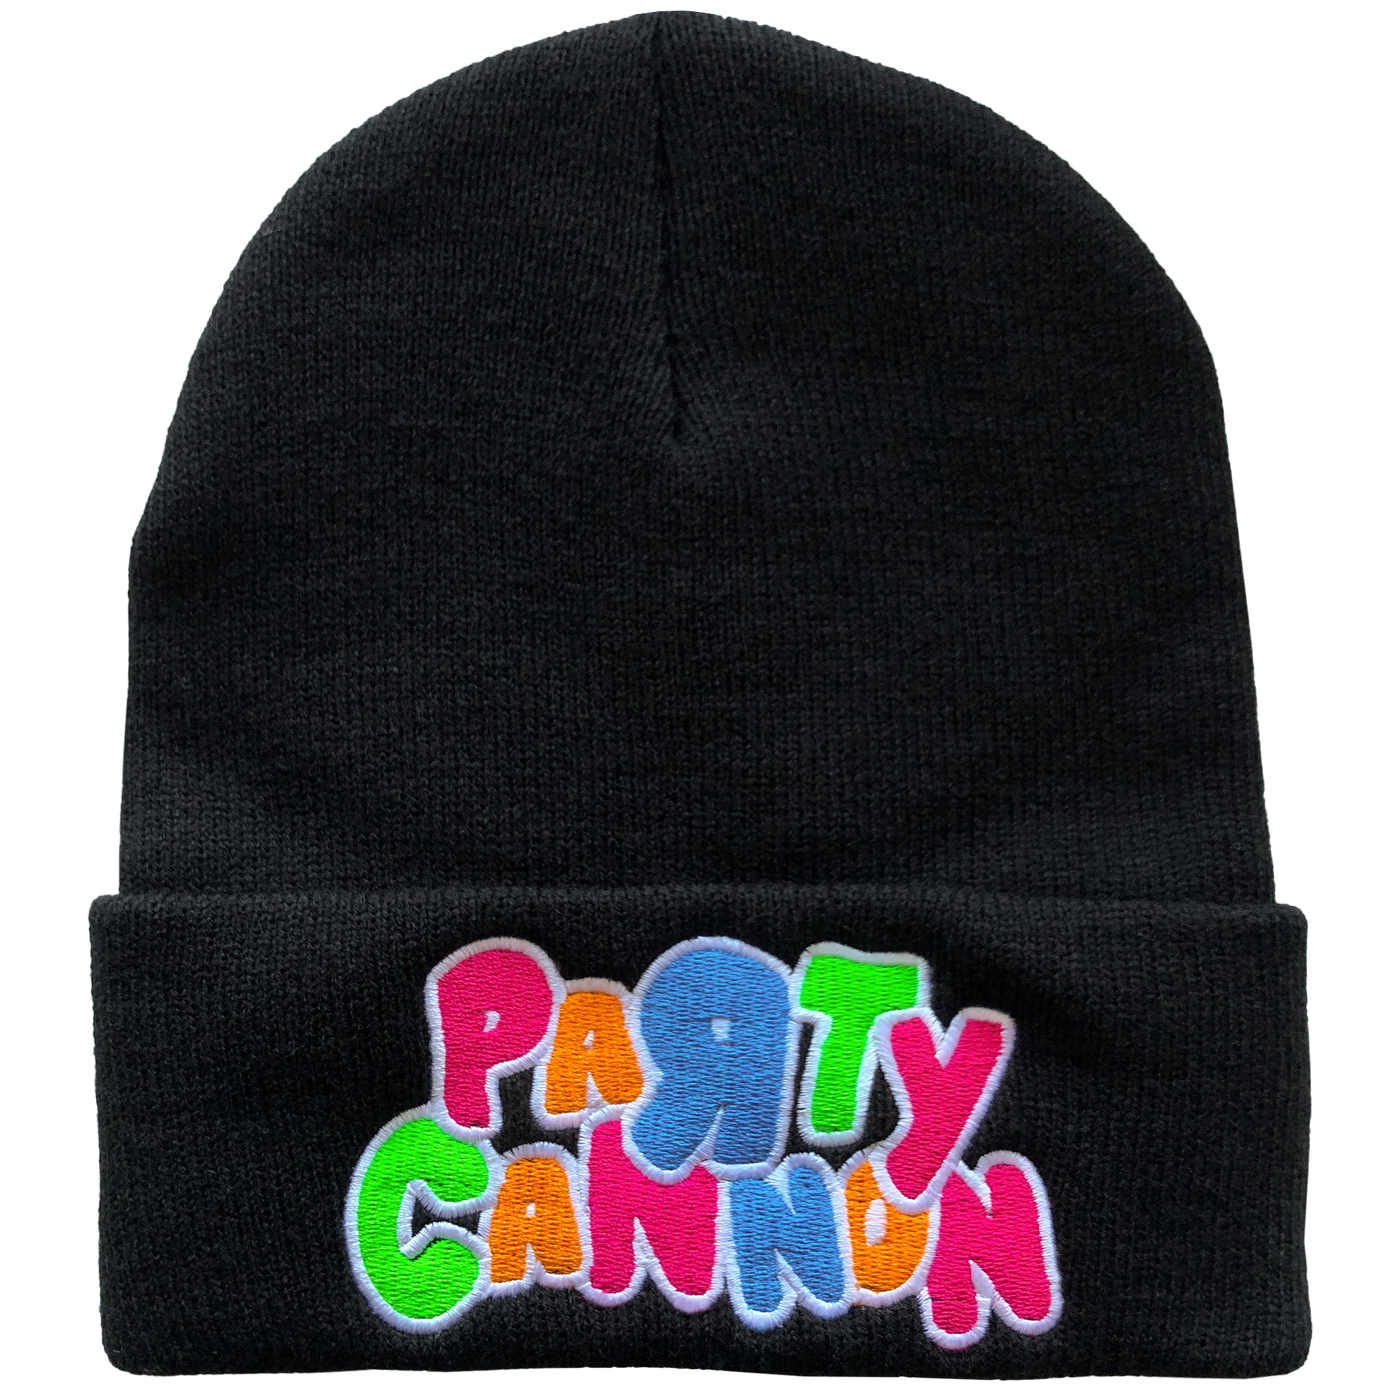 Party Cannon Beanies